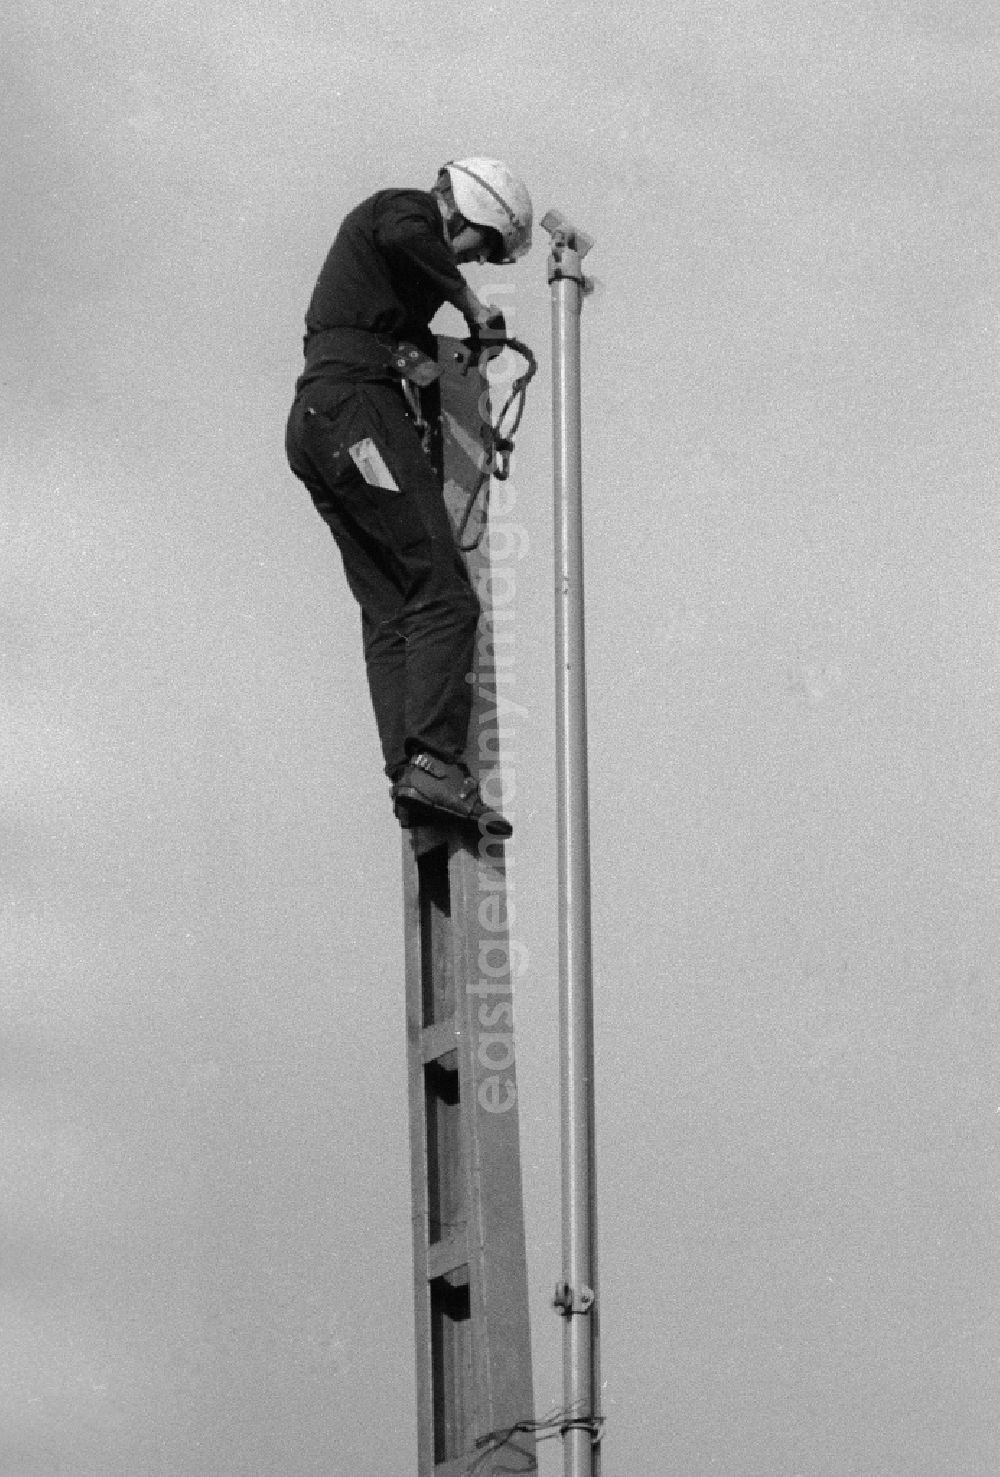 GDR image archive: Seddiner See - An employee of the German national railway mounts to driving poles in the railway station Seddin the direction in Seddiner See in the federal state Brandenburg in the area of the former GDR, German democratic republic